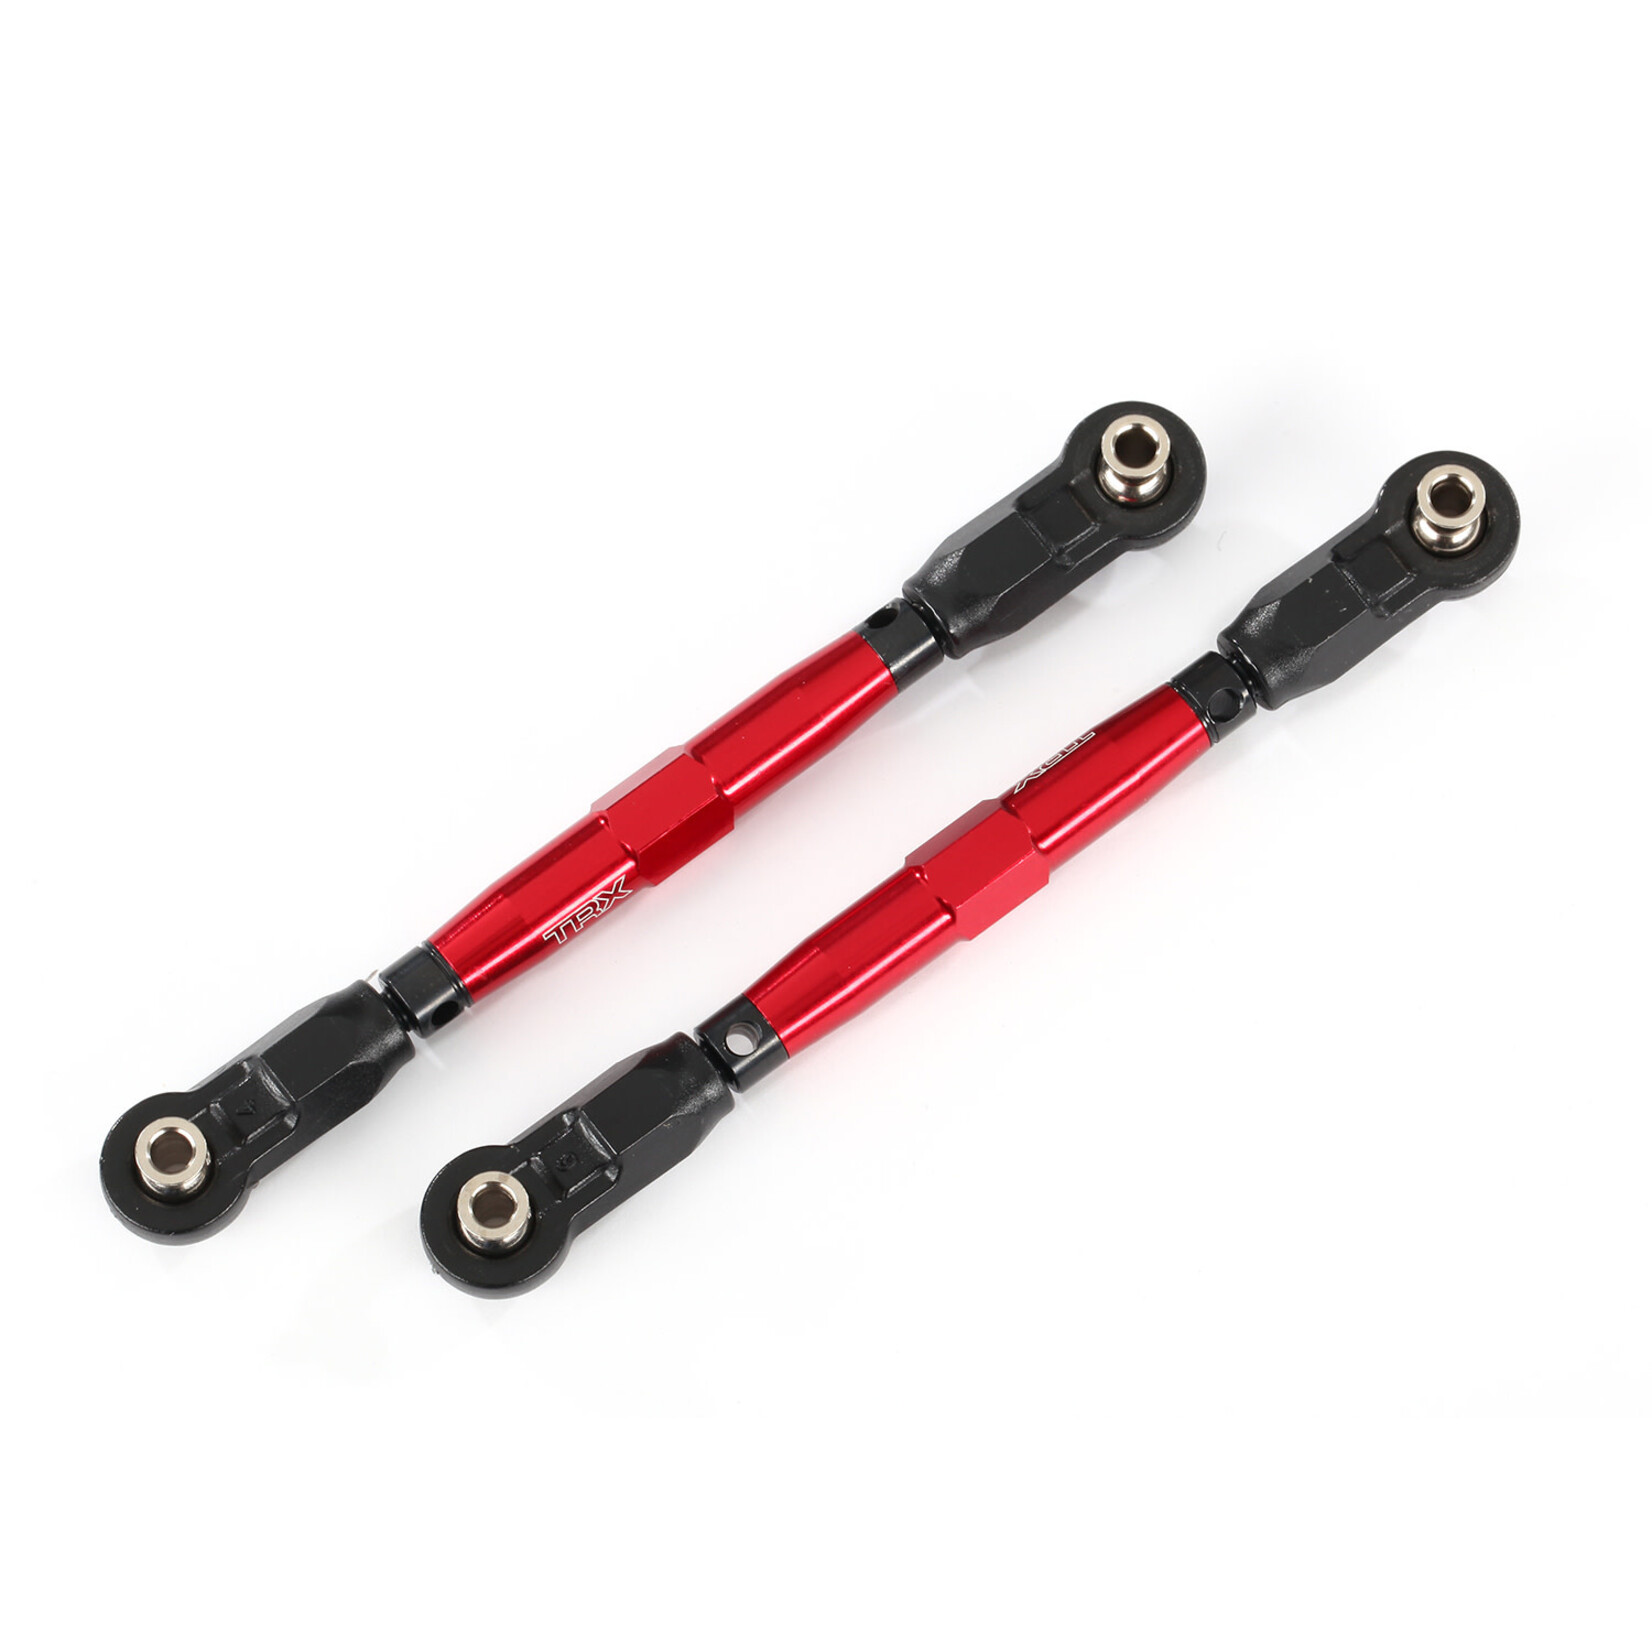 TRAXXAS Toe links, front (TUBES red-anodized, 7075-T6 aluminum, stronger than titanium) (88mm) (2)/ rod ends, rear (4)/ rod ends, front (4)/ aluminum wrench (1)